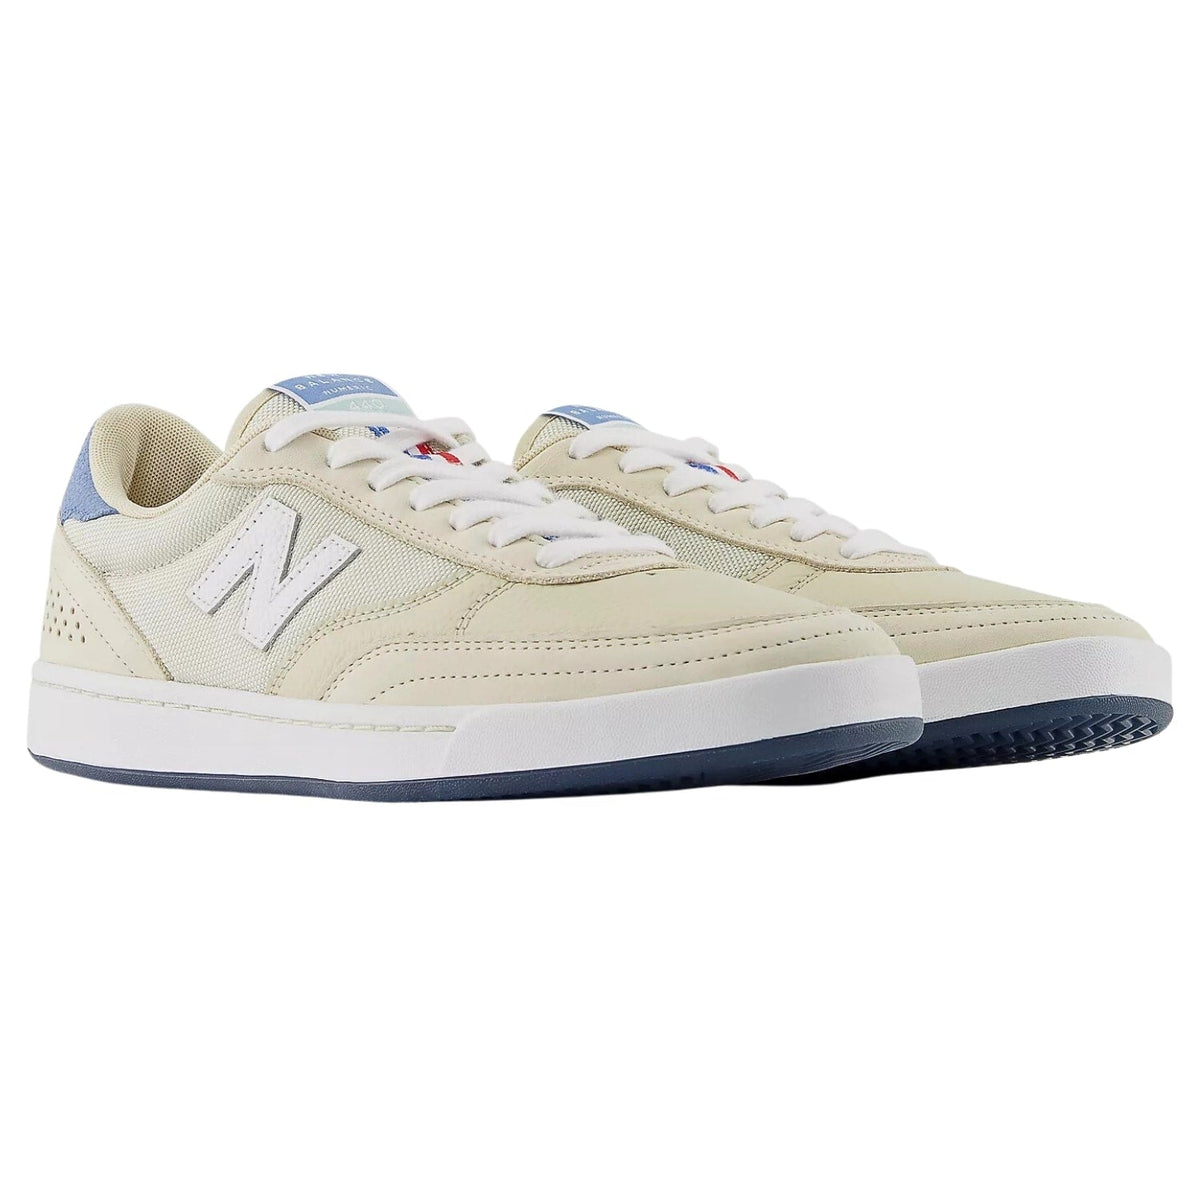 New Balance Numeric Nm440 X Welcome Skate Shoes - Sea Salt/Red - Mens Skate Shoes by New Balance Numeric